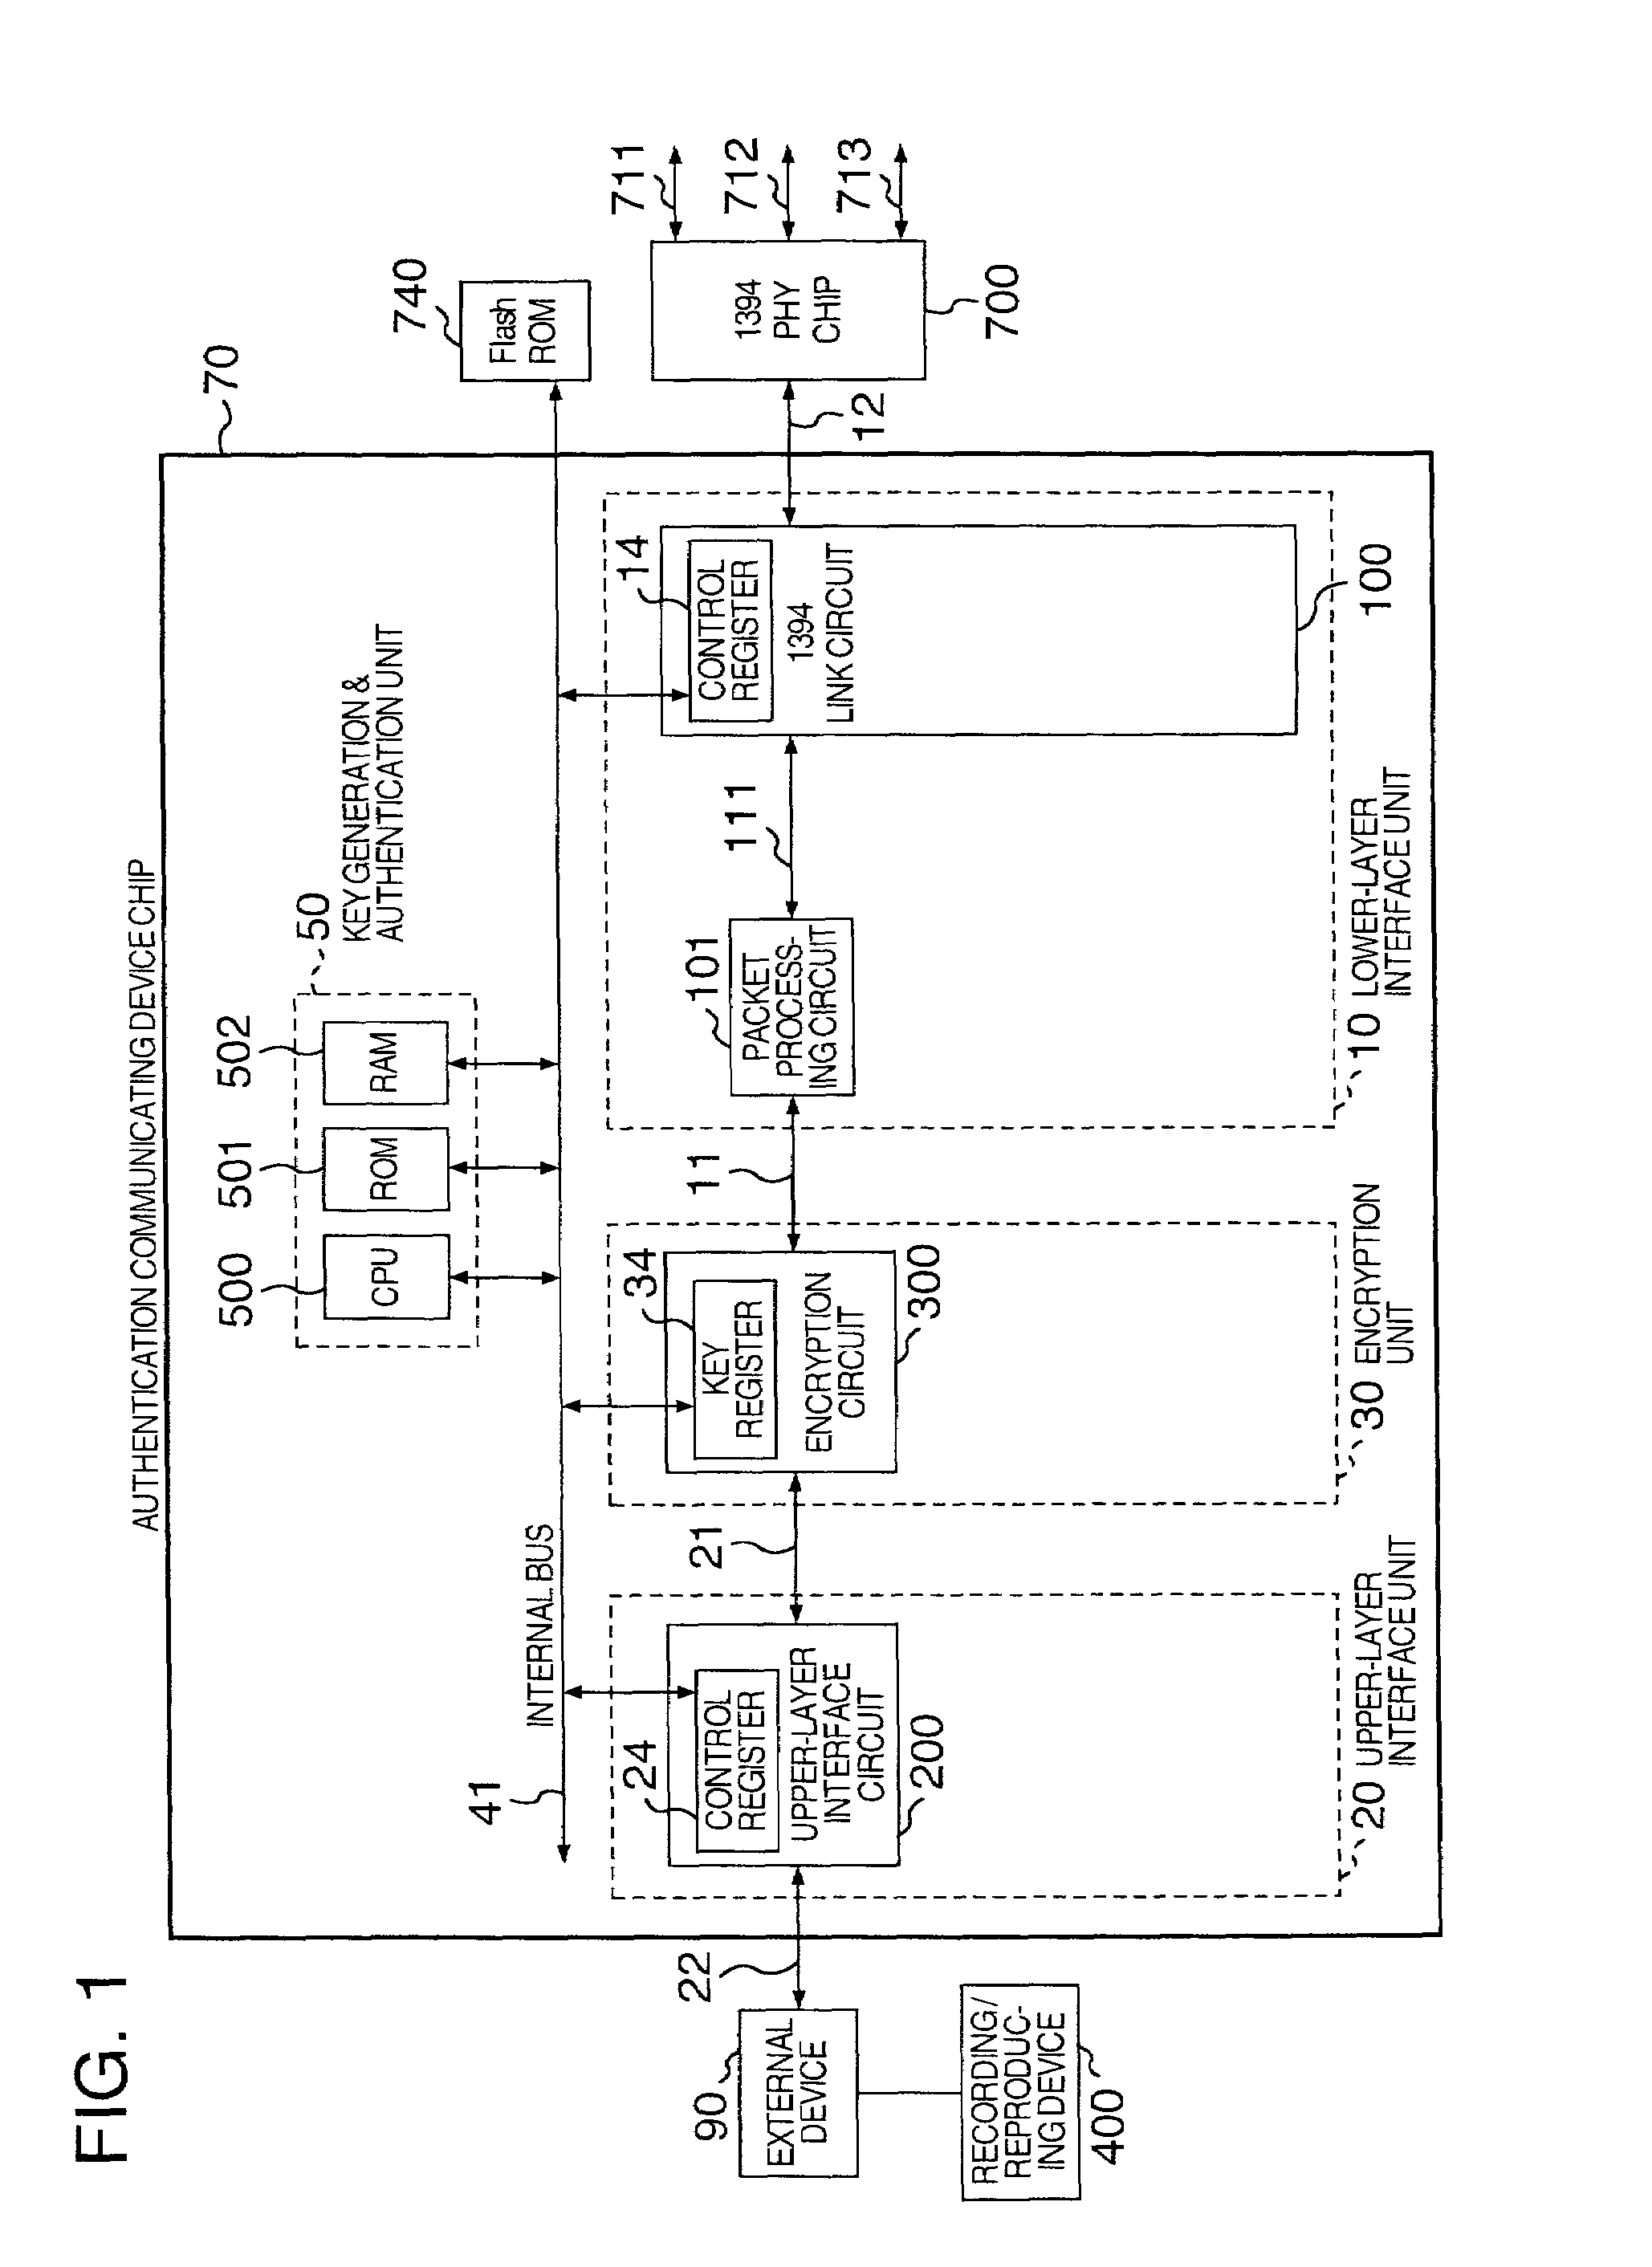 Authentication communicating semiconductor device